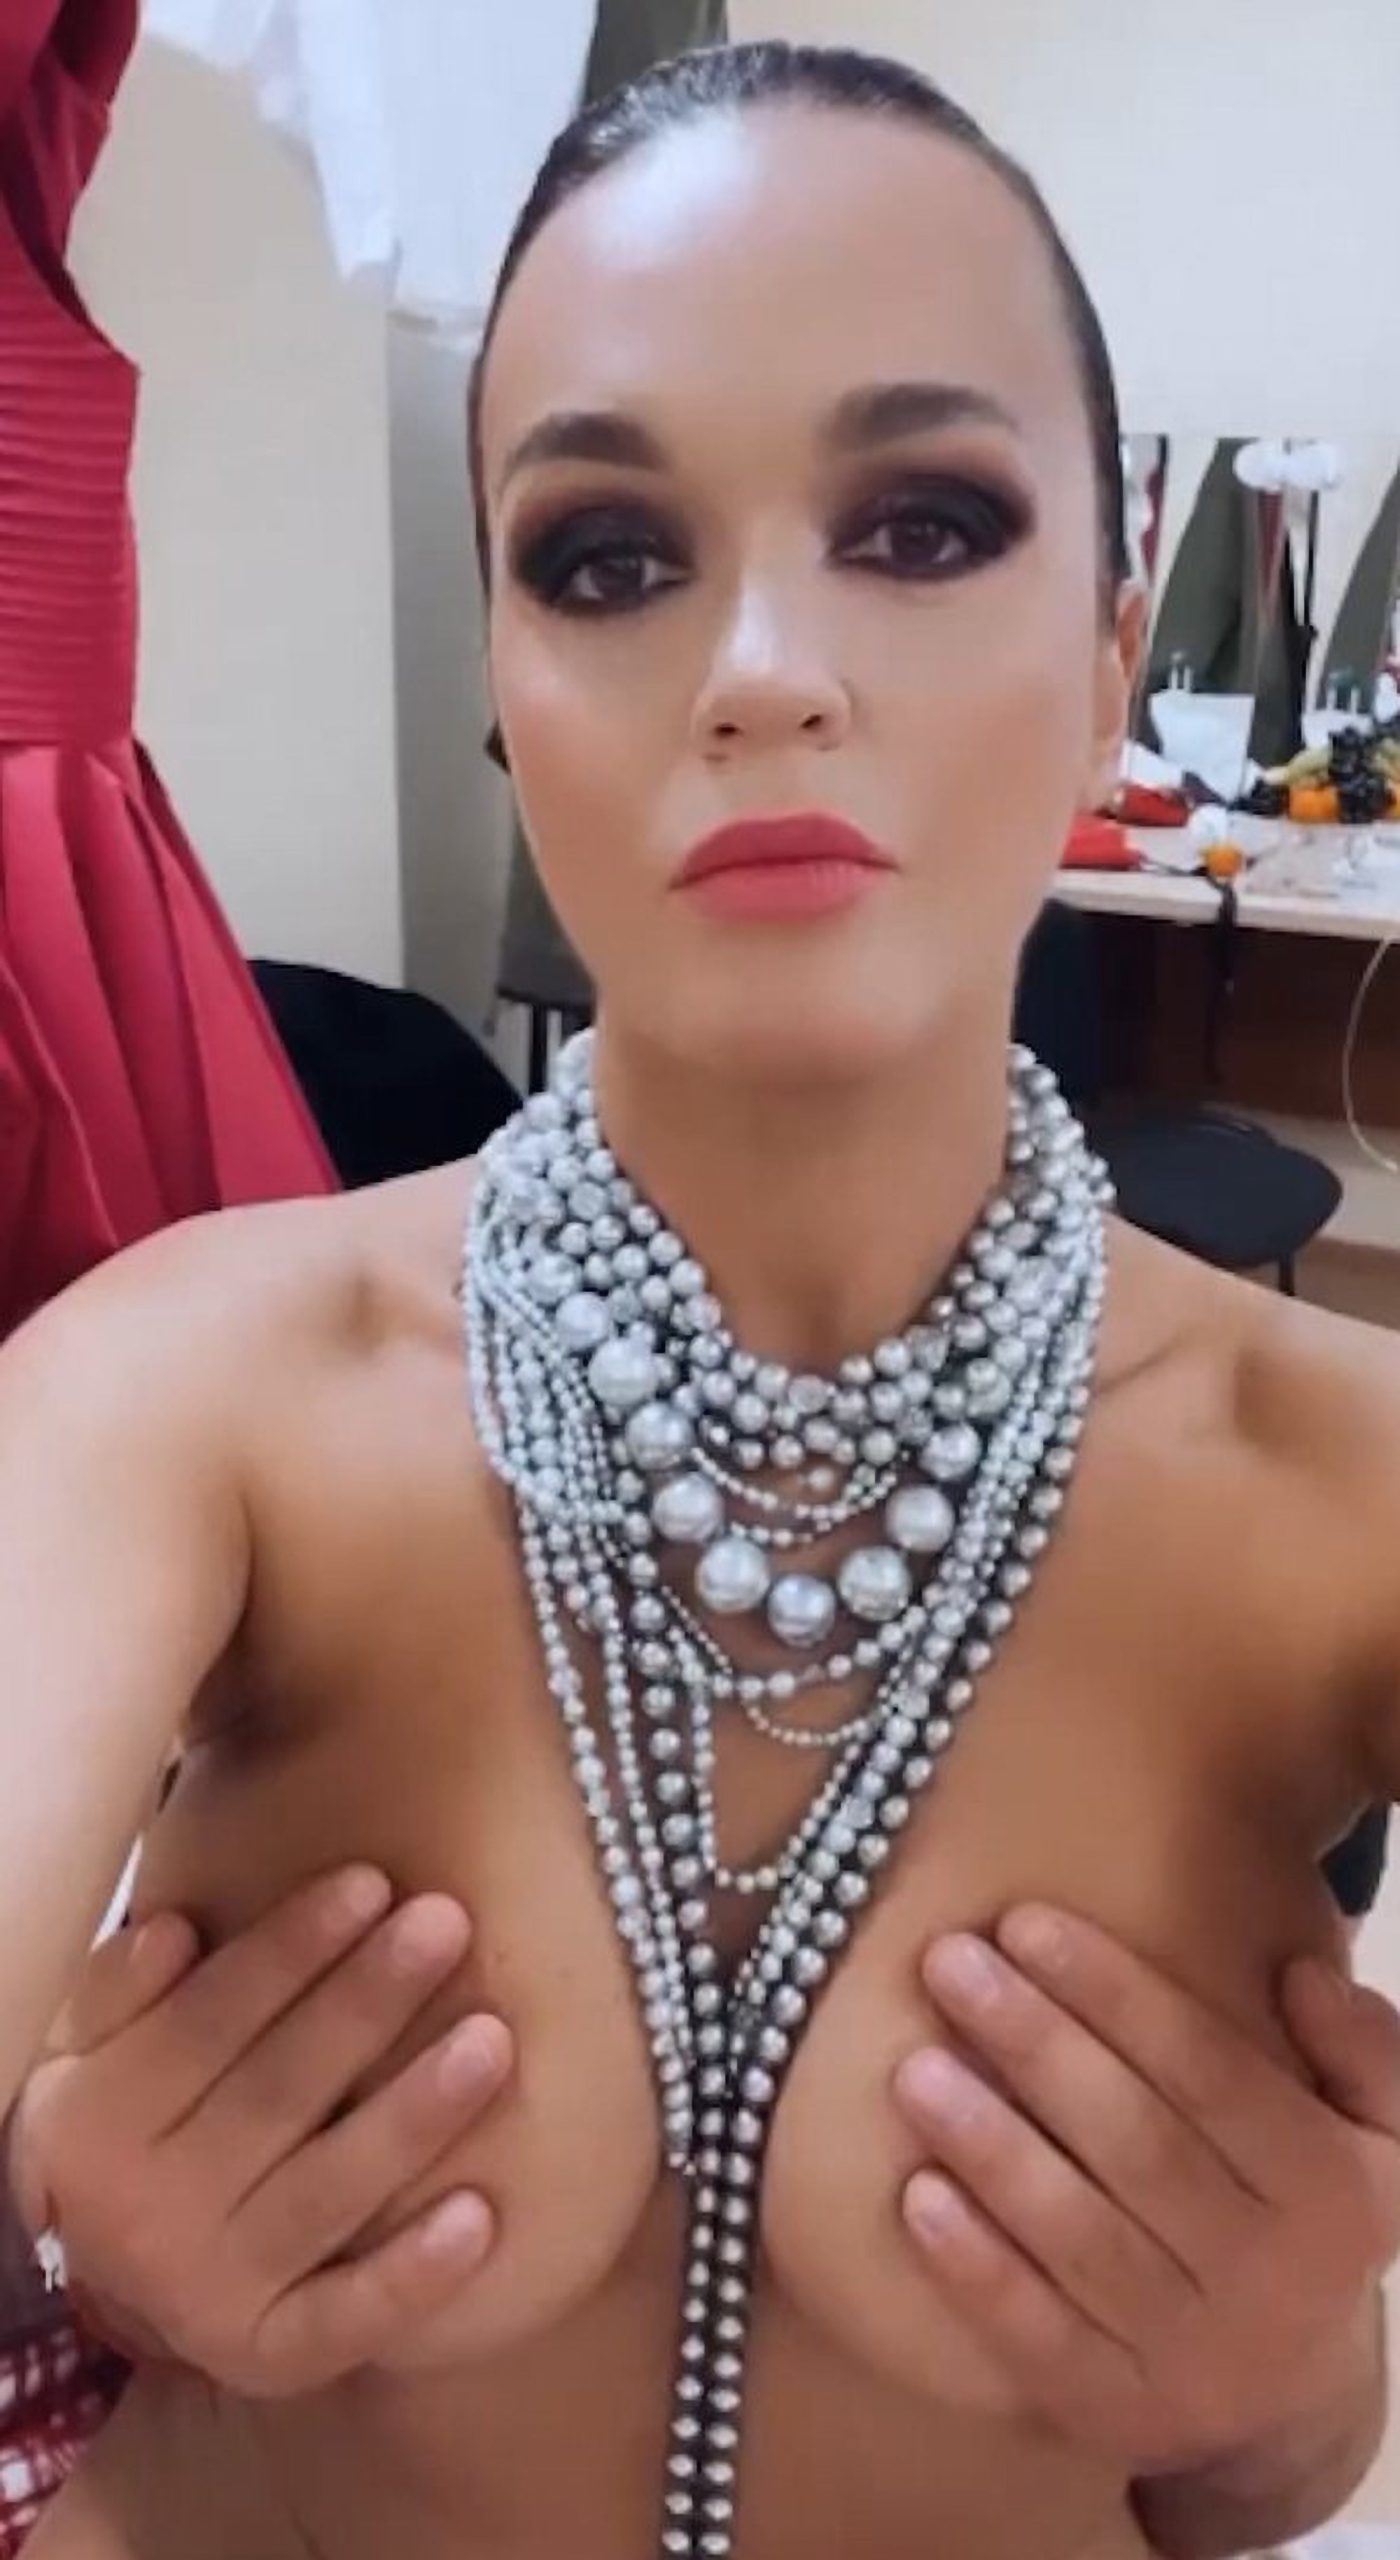 Read more about the article Russian Singer Sparks Outrage With Vid Of Man Cupping Her B00bs On Fatherland Day As She Wishes Followers World Peace